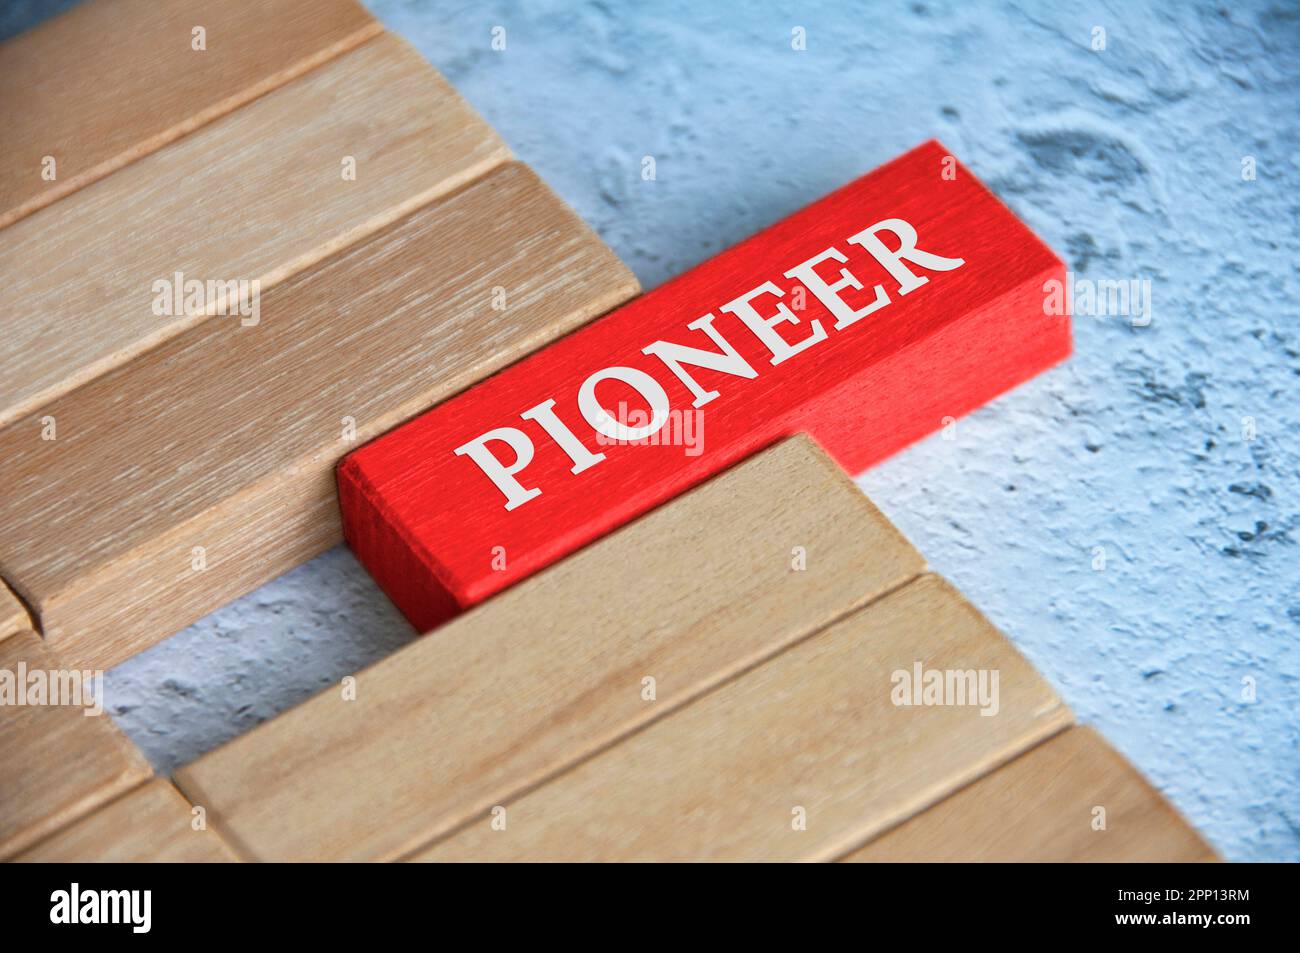 Top view of Pioneer text on red color wooden blocks. Stock Photo